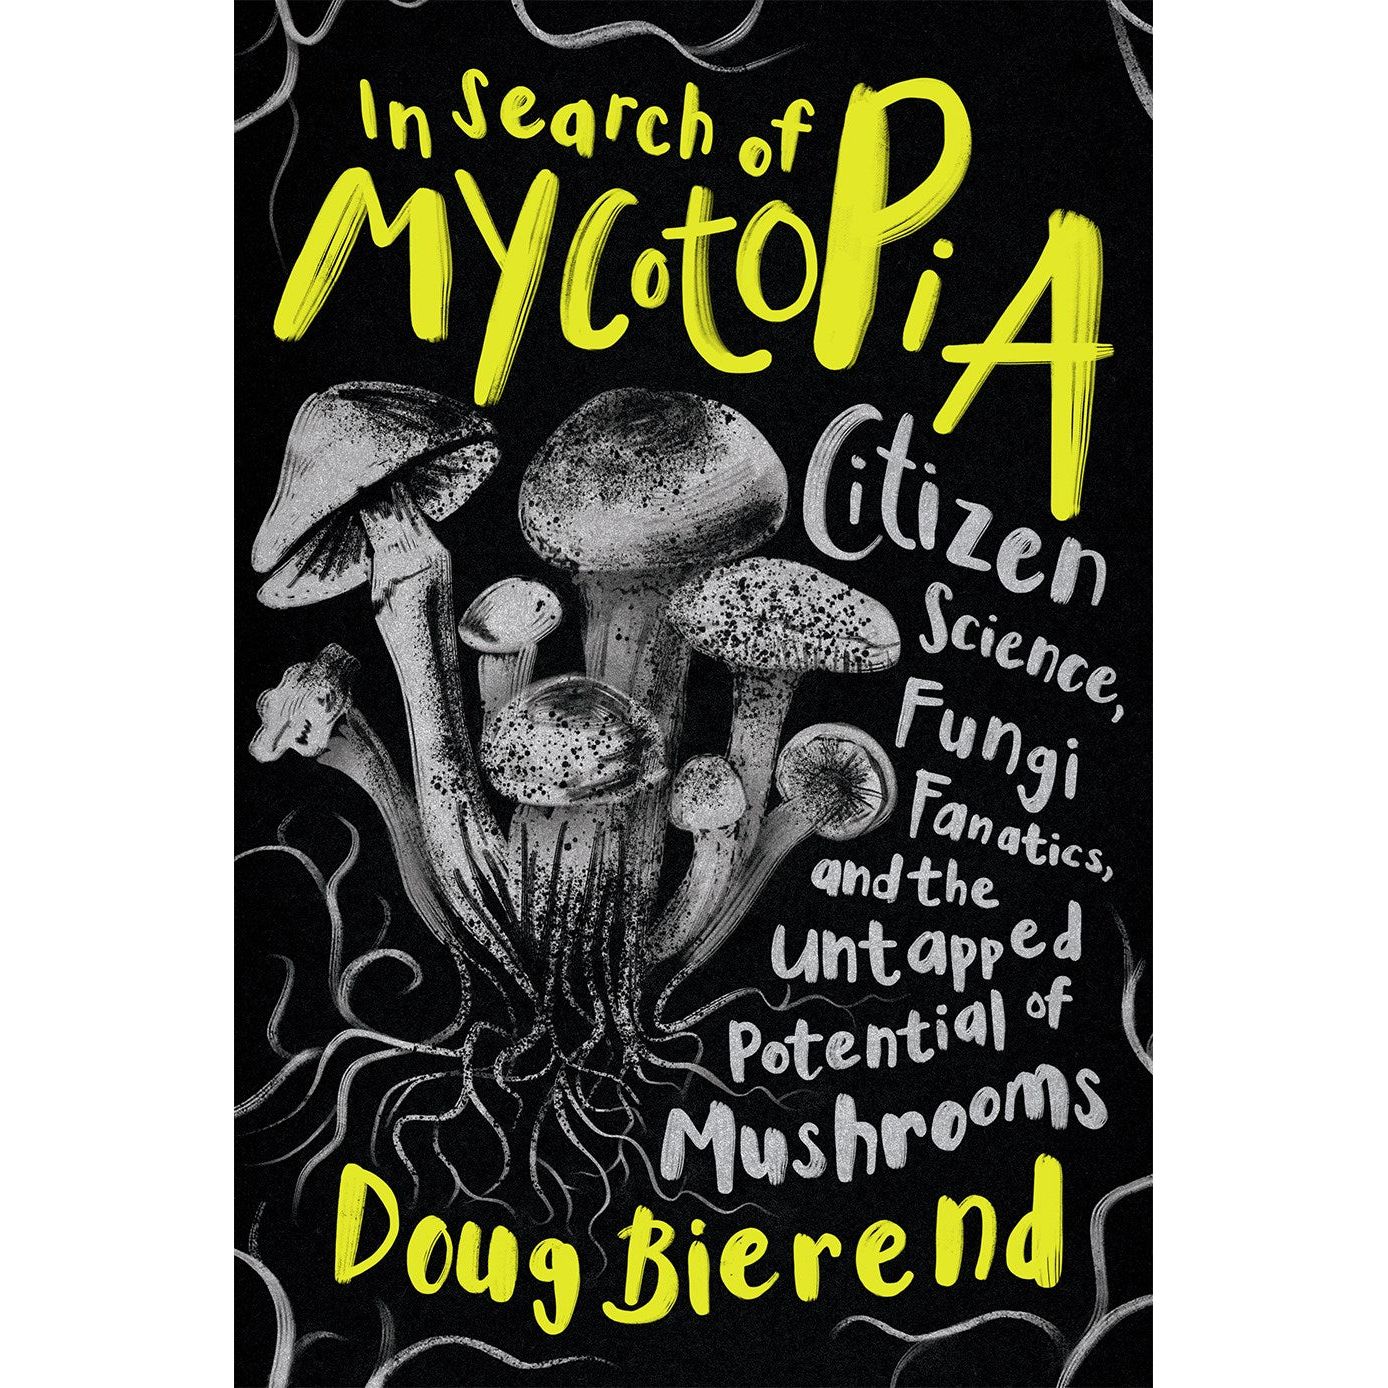 In Search of Mycotopia (Doug Bierend)